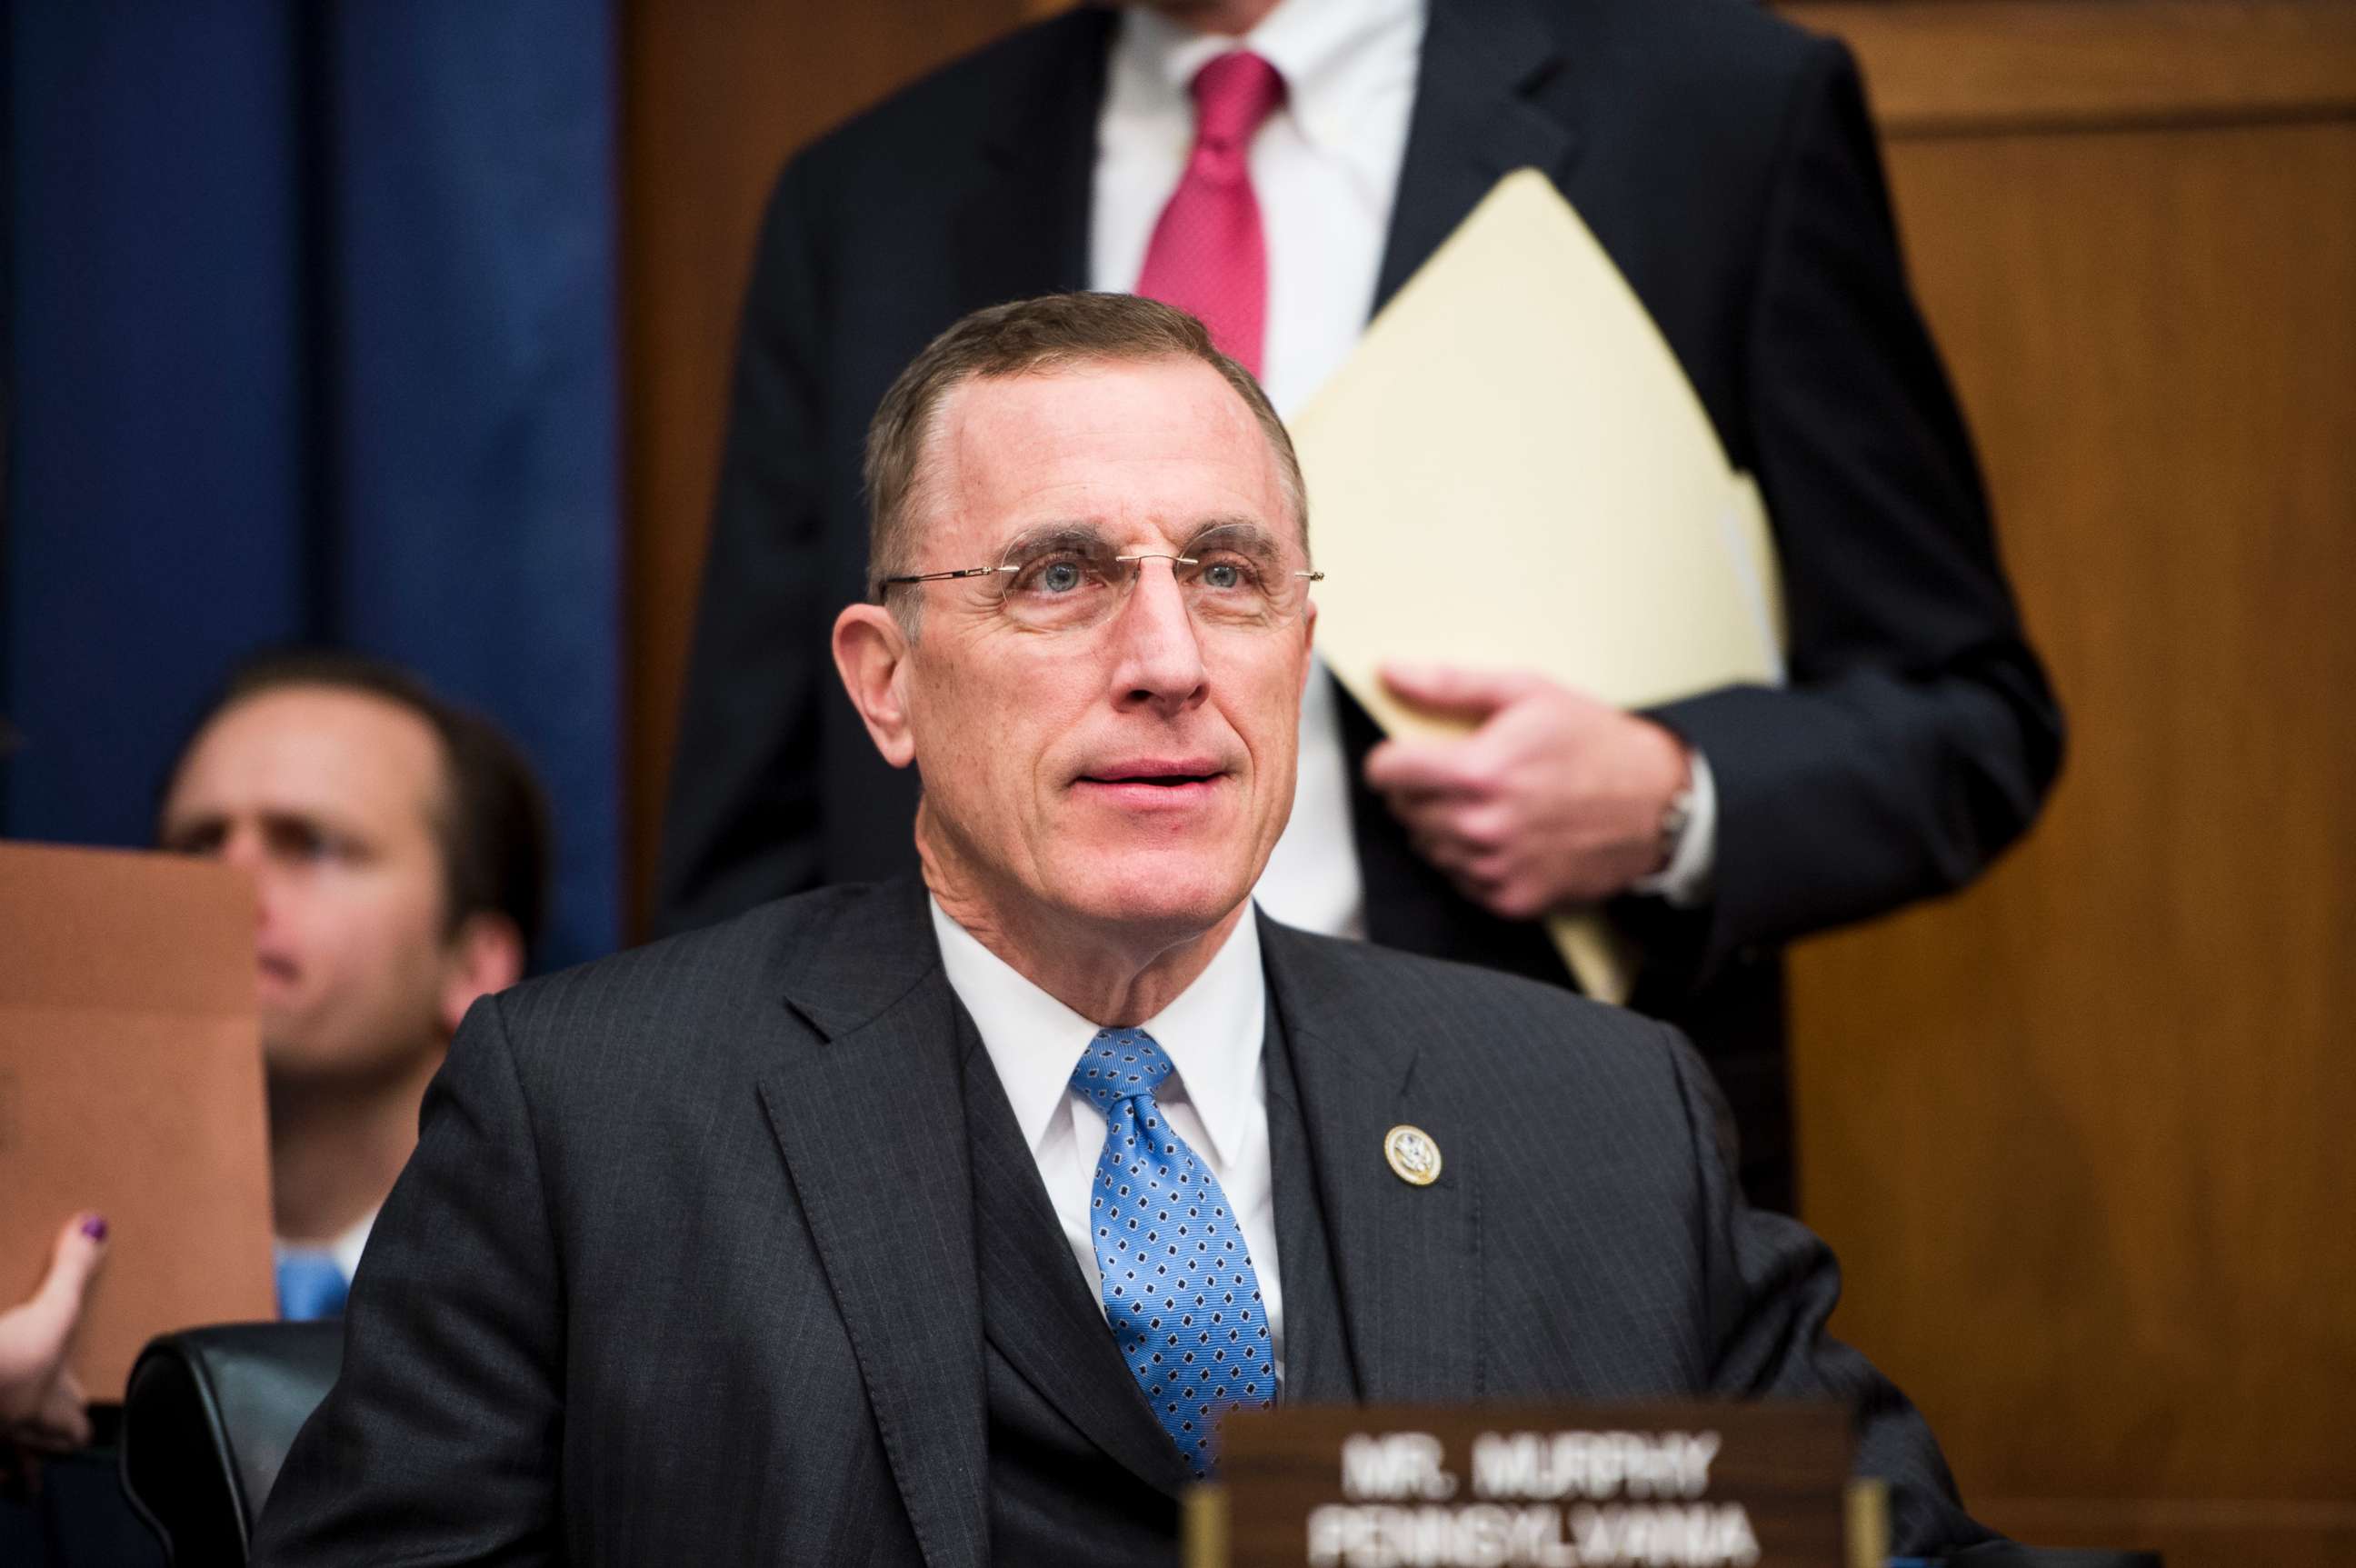 PHOTO: Rep. Tim Murphy attends the House Energy and Commerce Committee meeting to organize for the 115th Congress, Jan. 24, 2017 in Washington, D.C. 